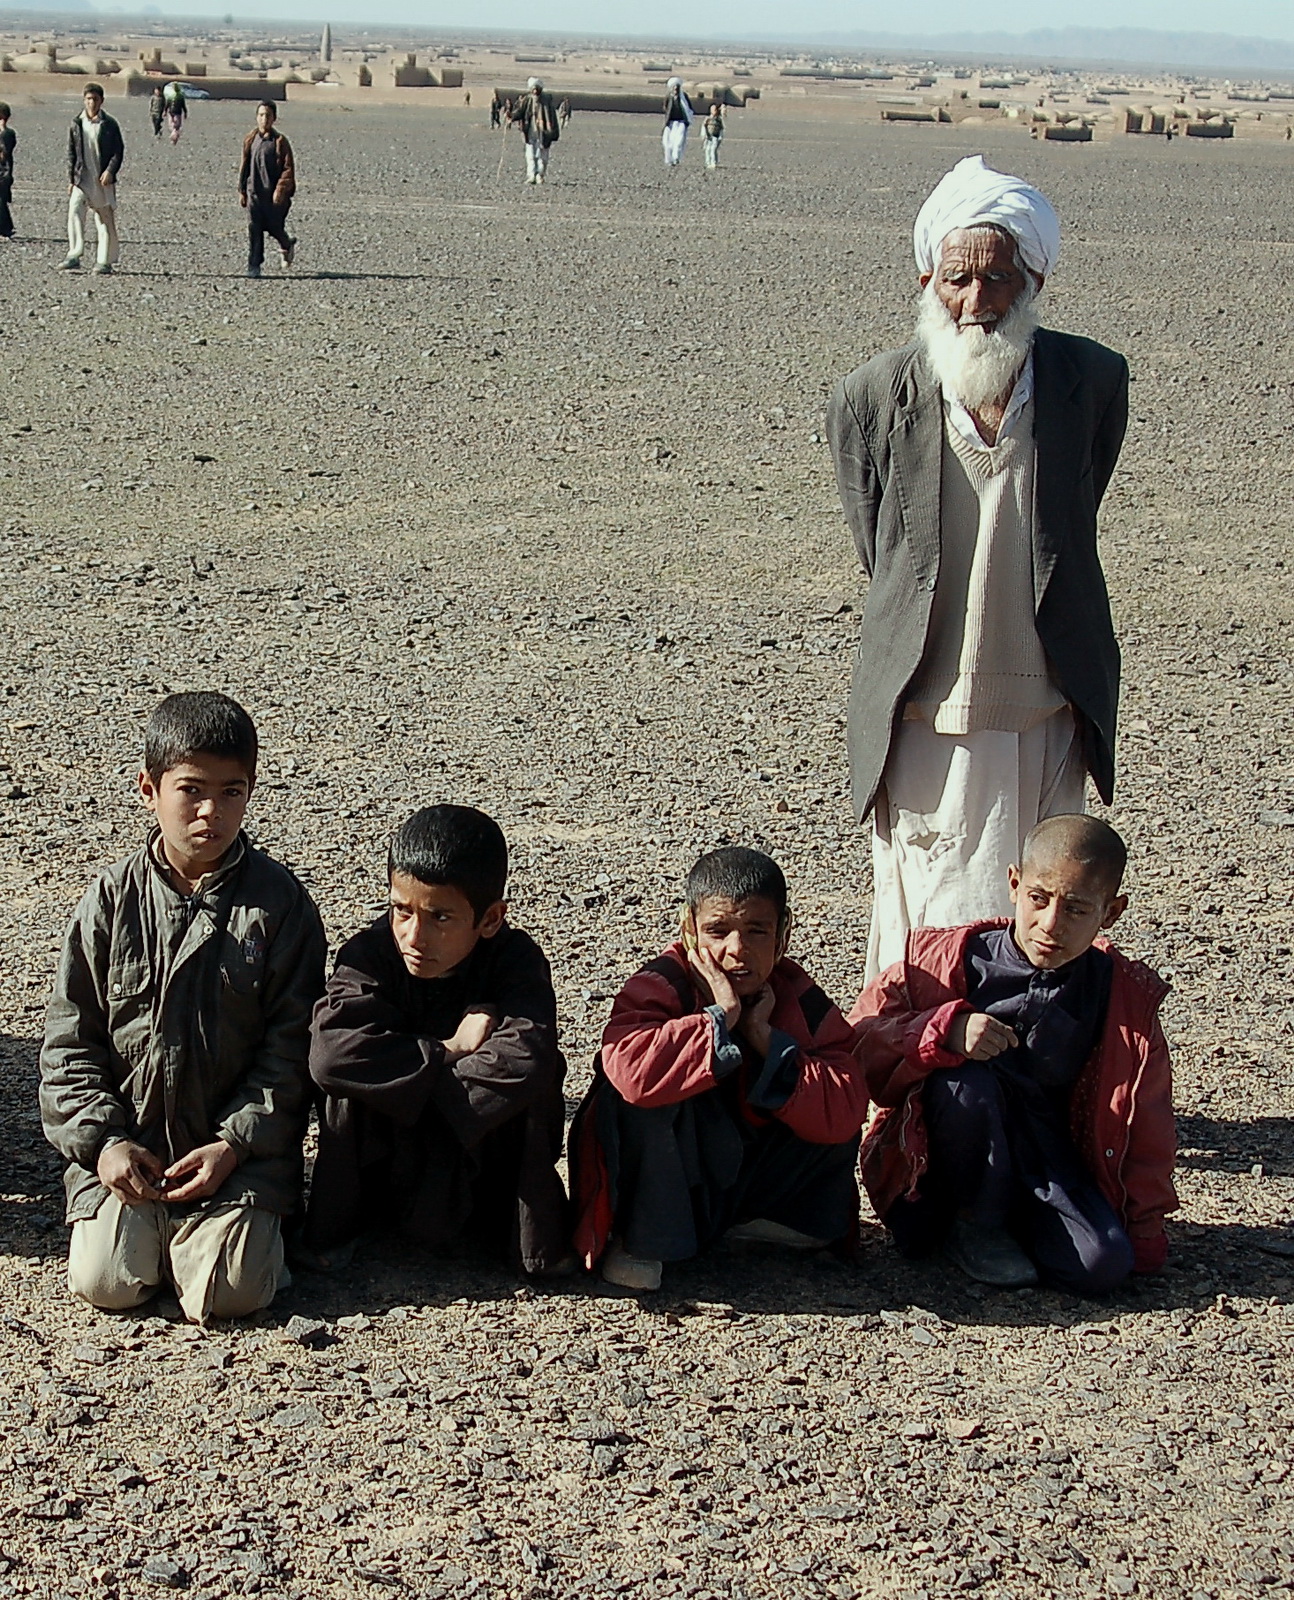 several children standing in the desert with a large figure of an old man